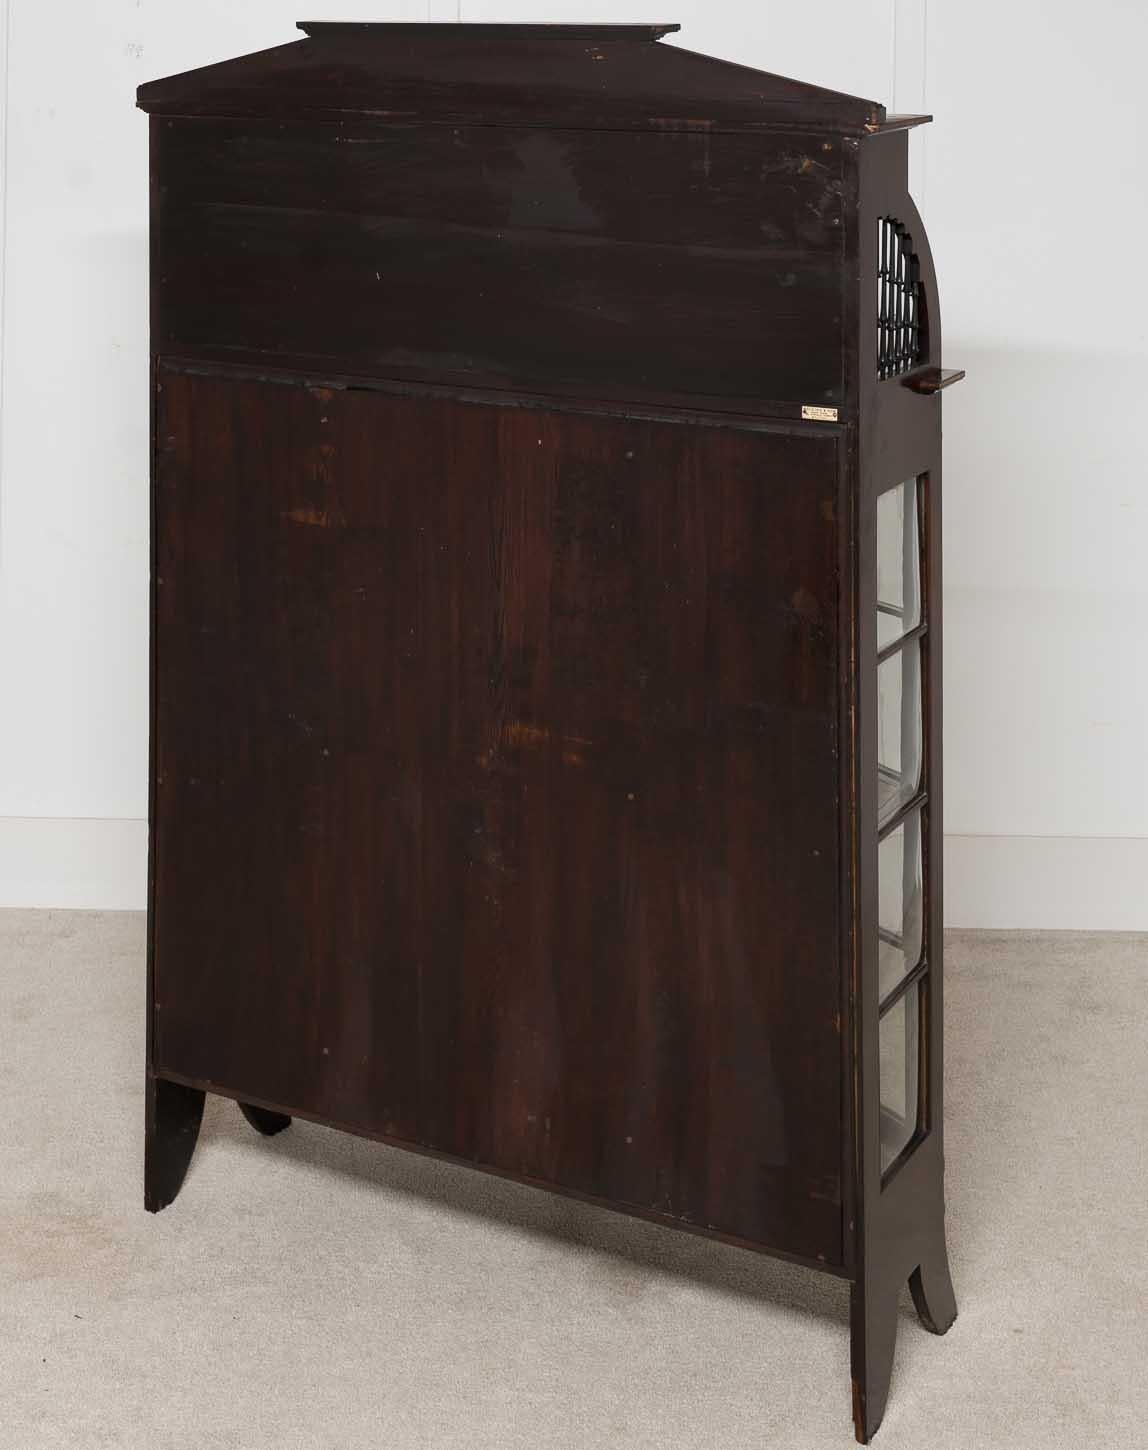 Early 20th Century Art Nouveau Display Cabinet English Cocktail Golding and Son 1900 For Sale